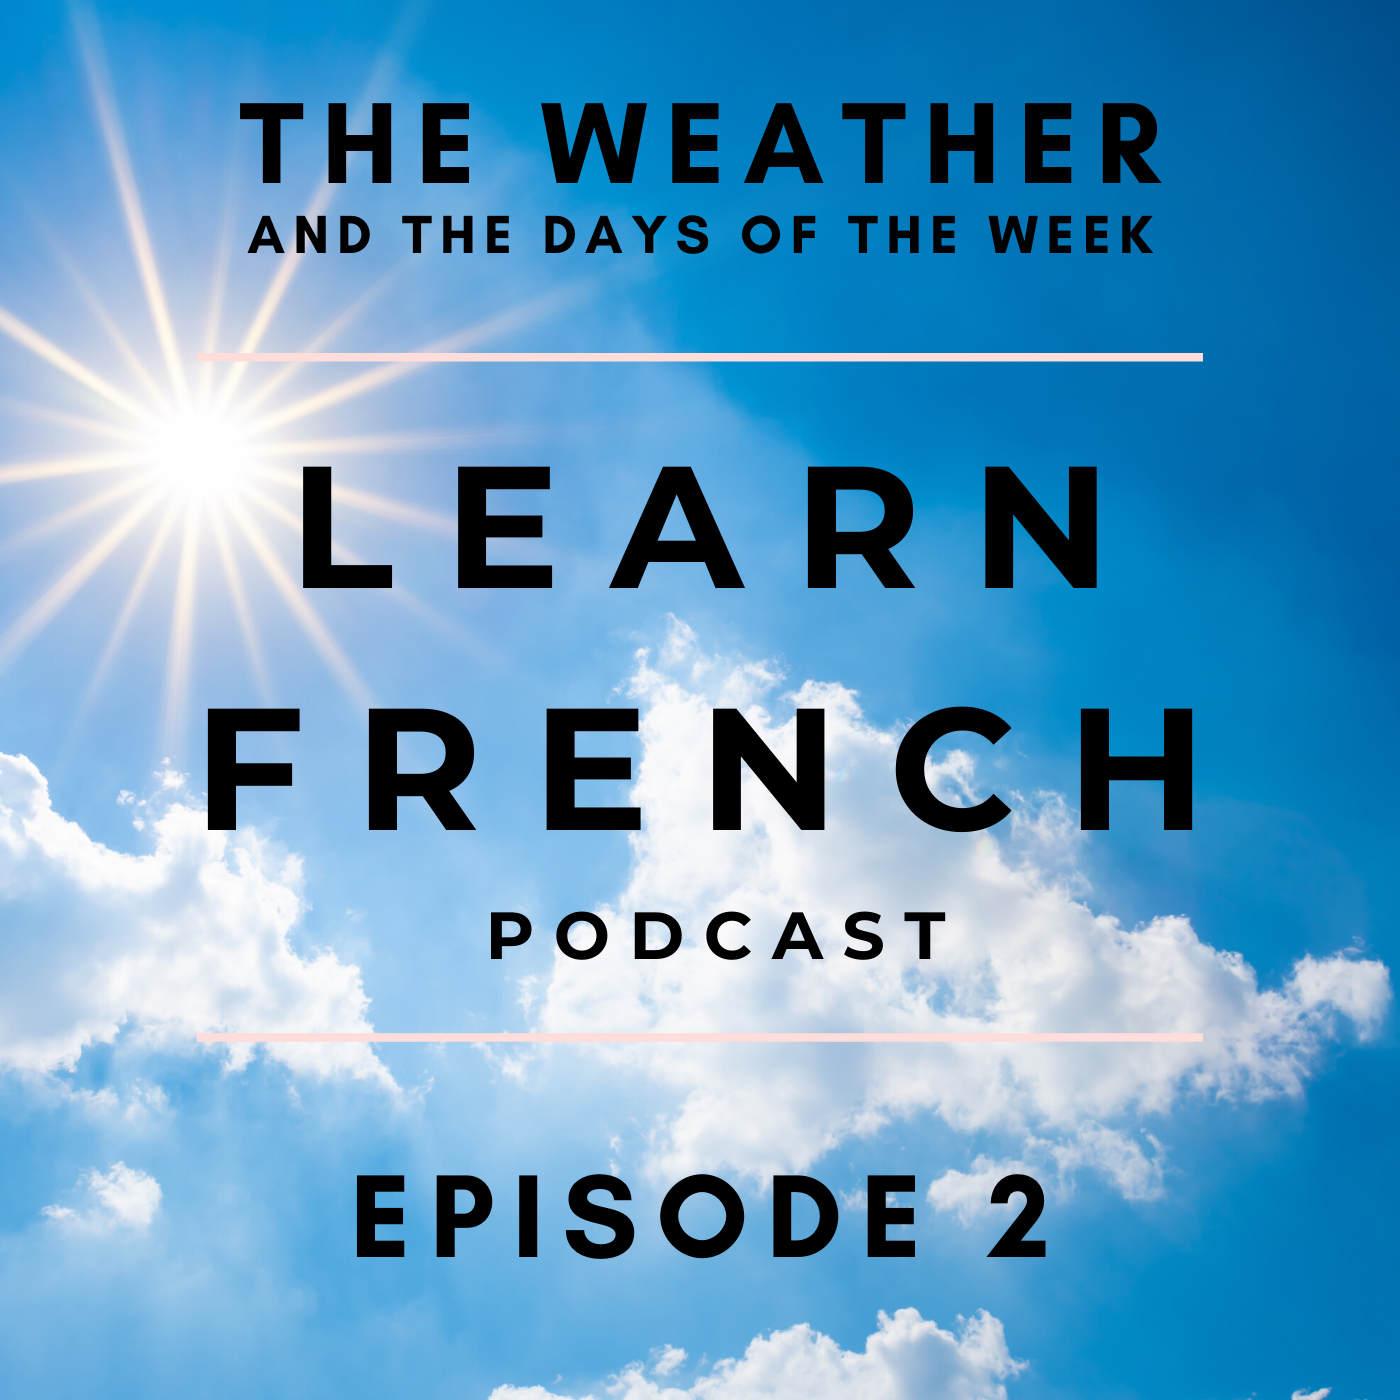 Learn French Podcast: The weather and the days of the week (Episode 2)